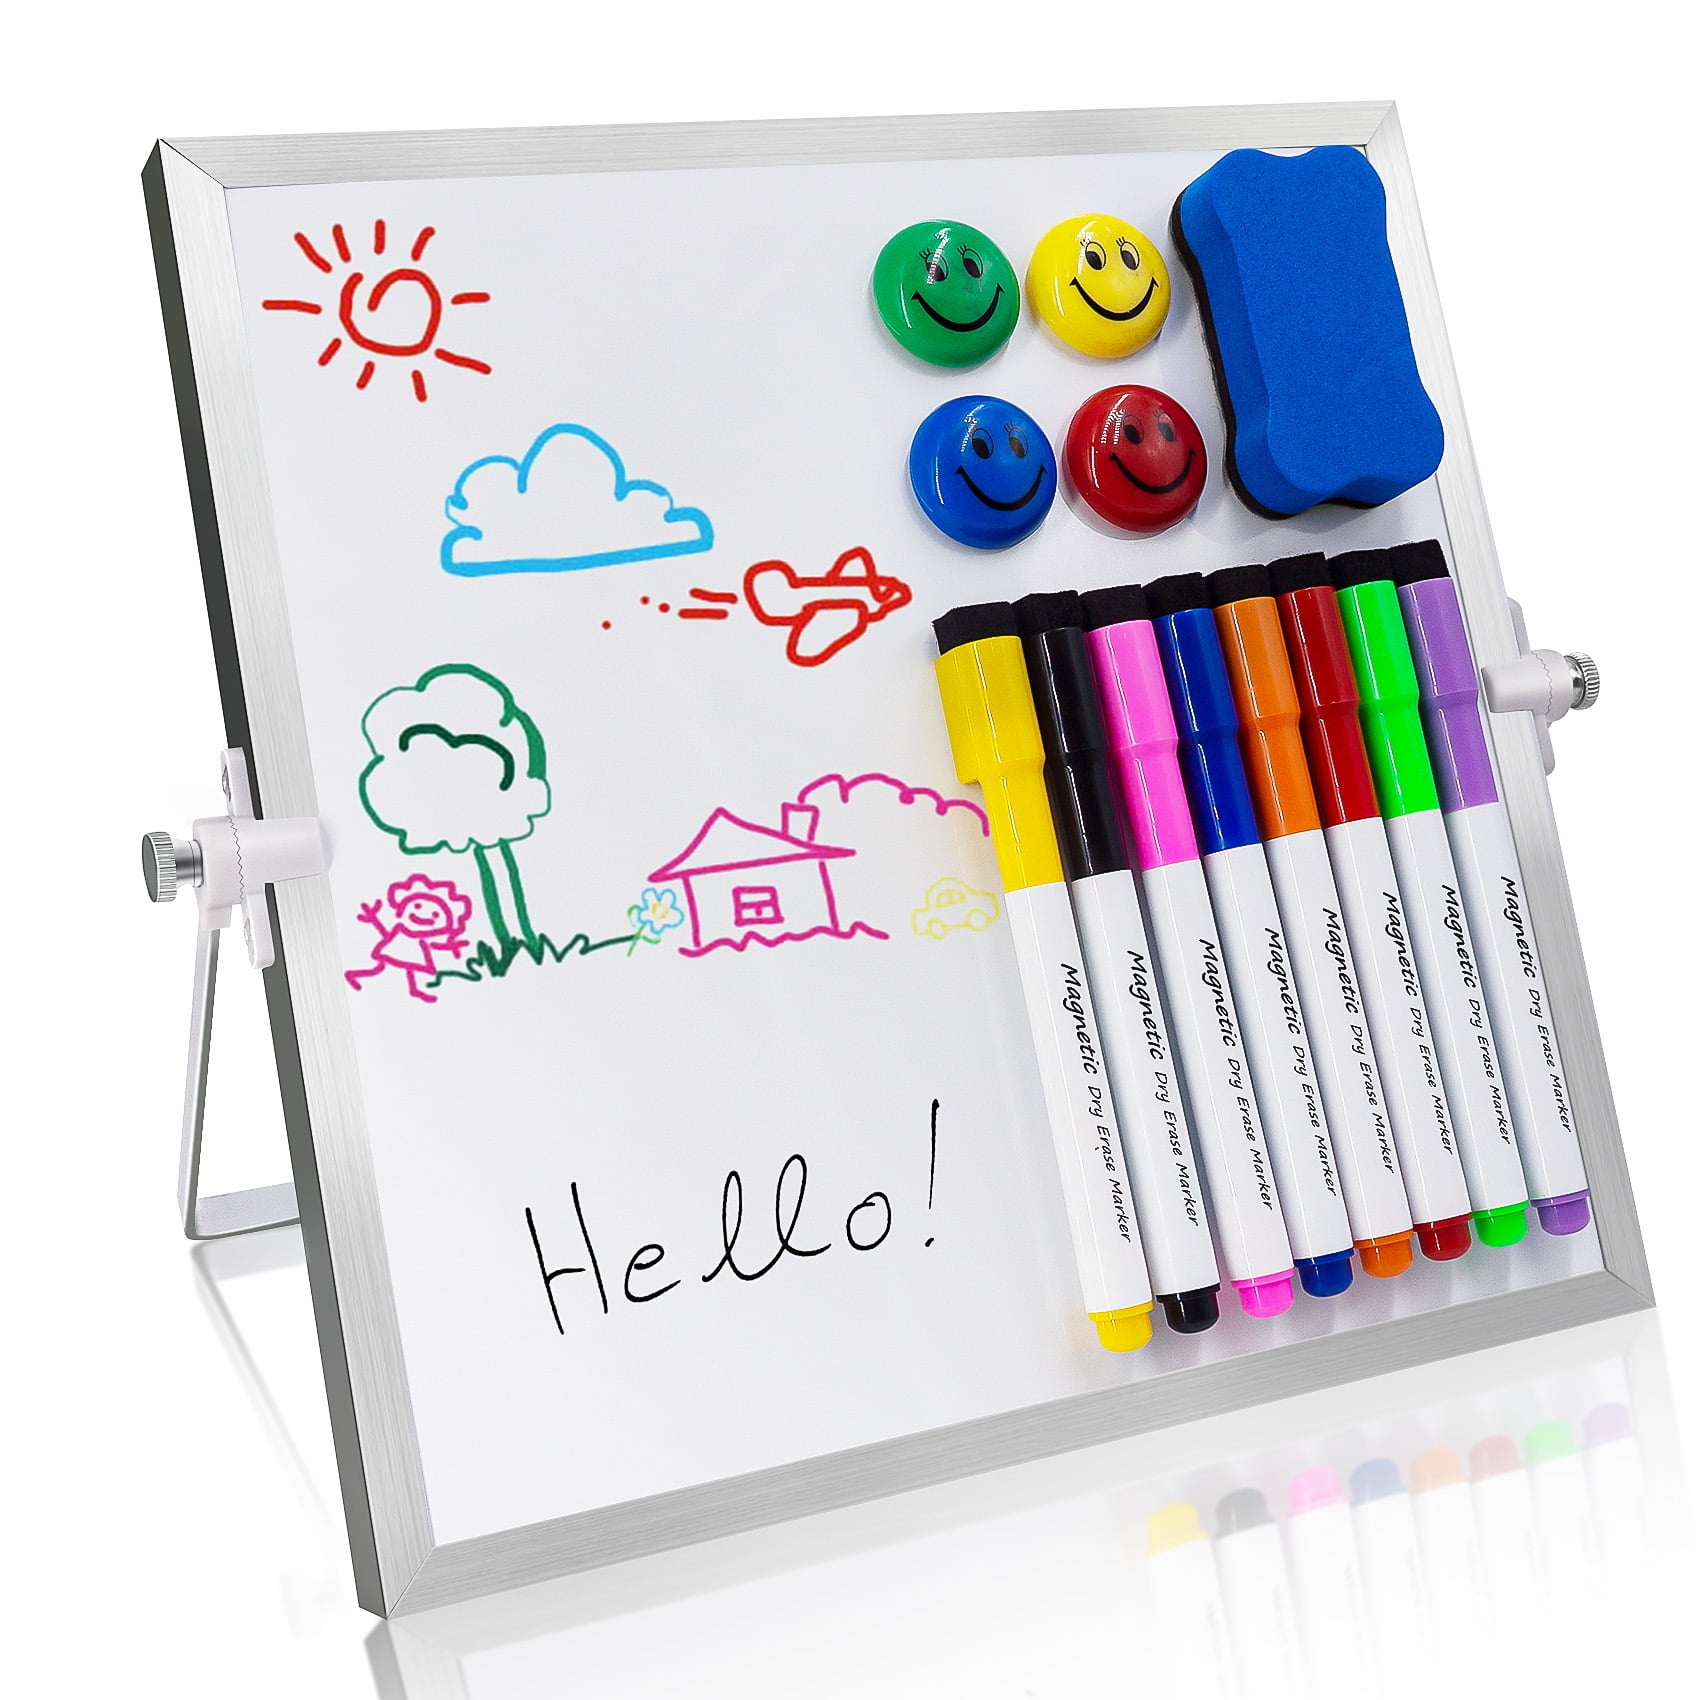 4 x 6 Mini Dry Erase Whiteboard Sheet with Adhesive on Back - Magnetic Receptive. 6 Pack